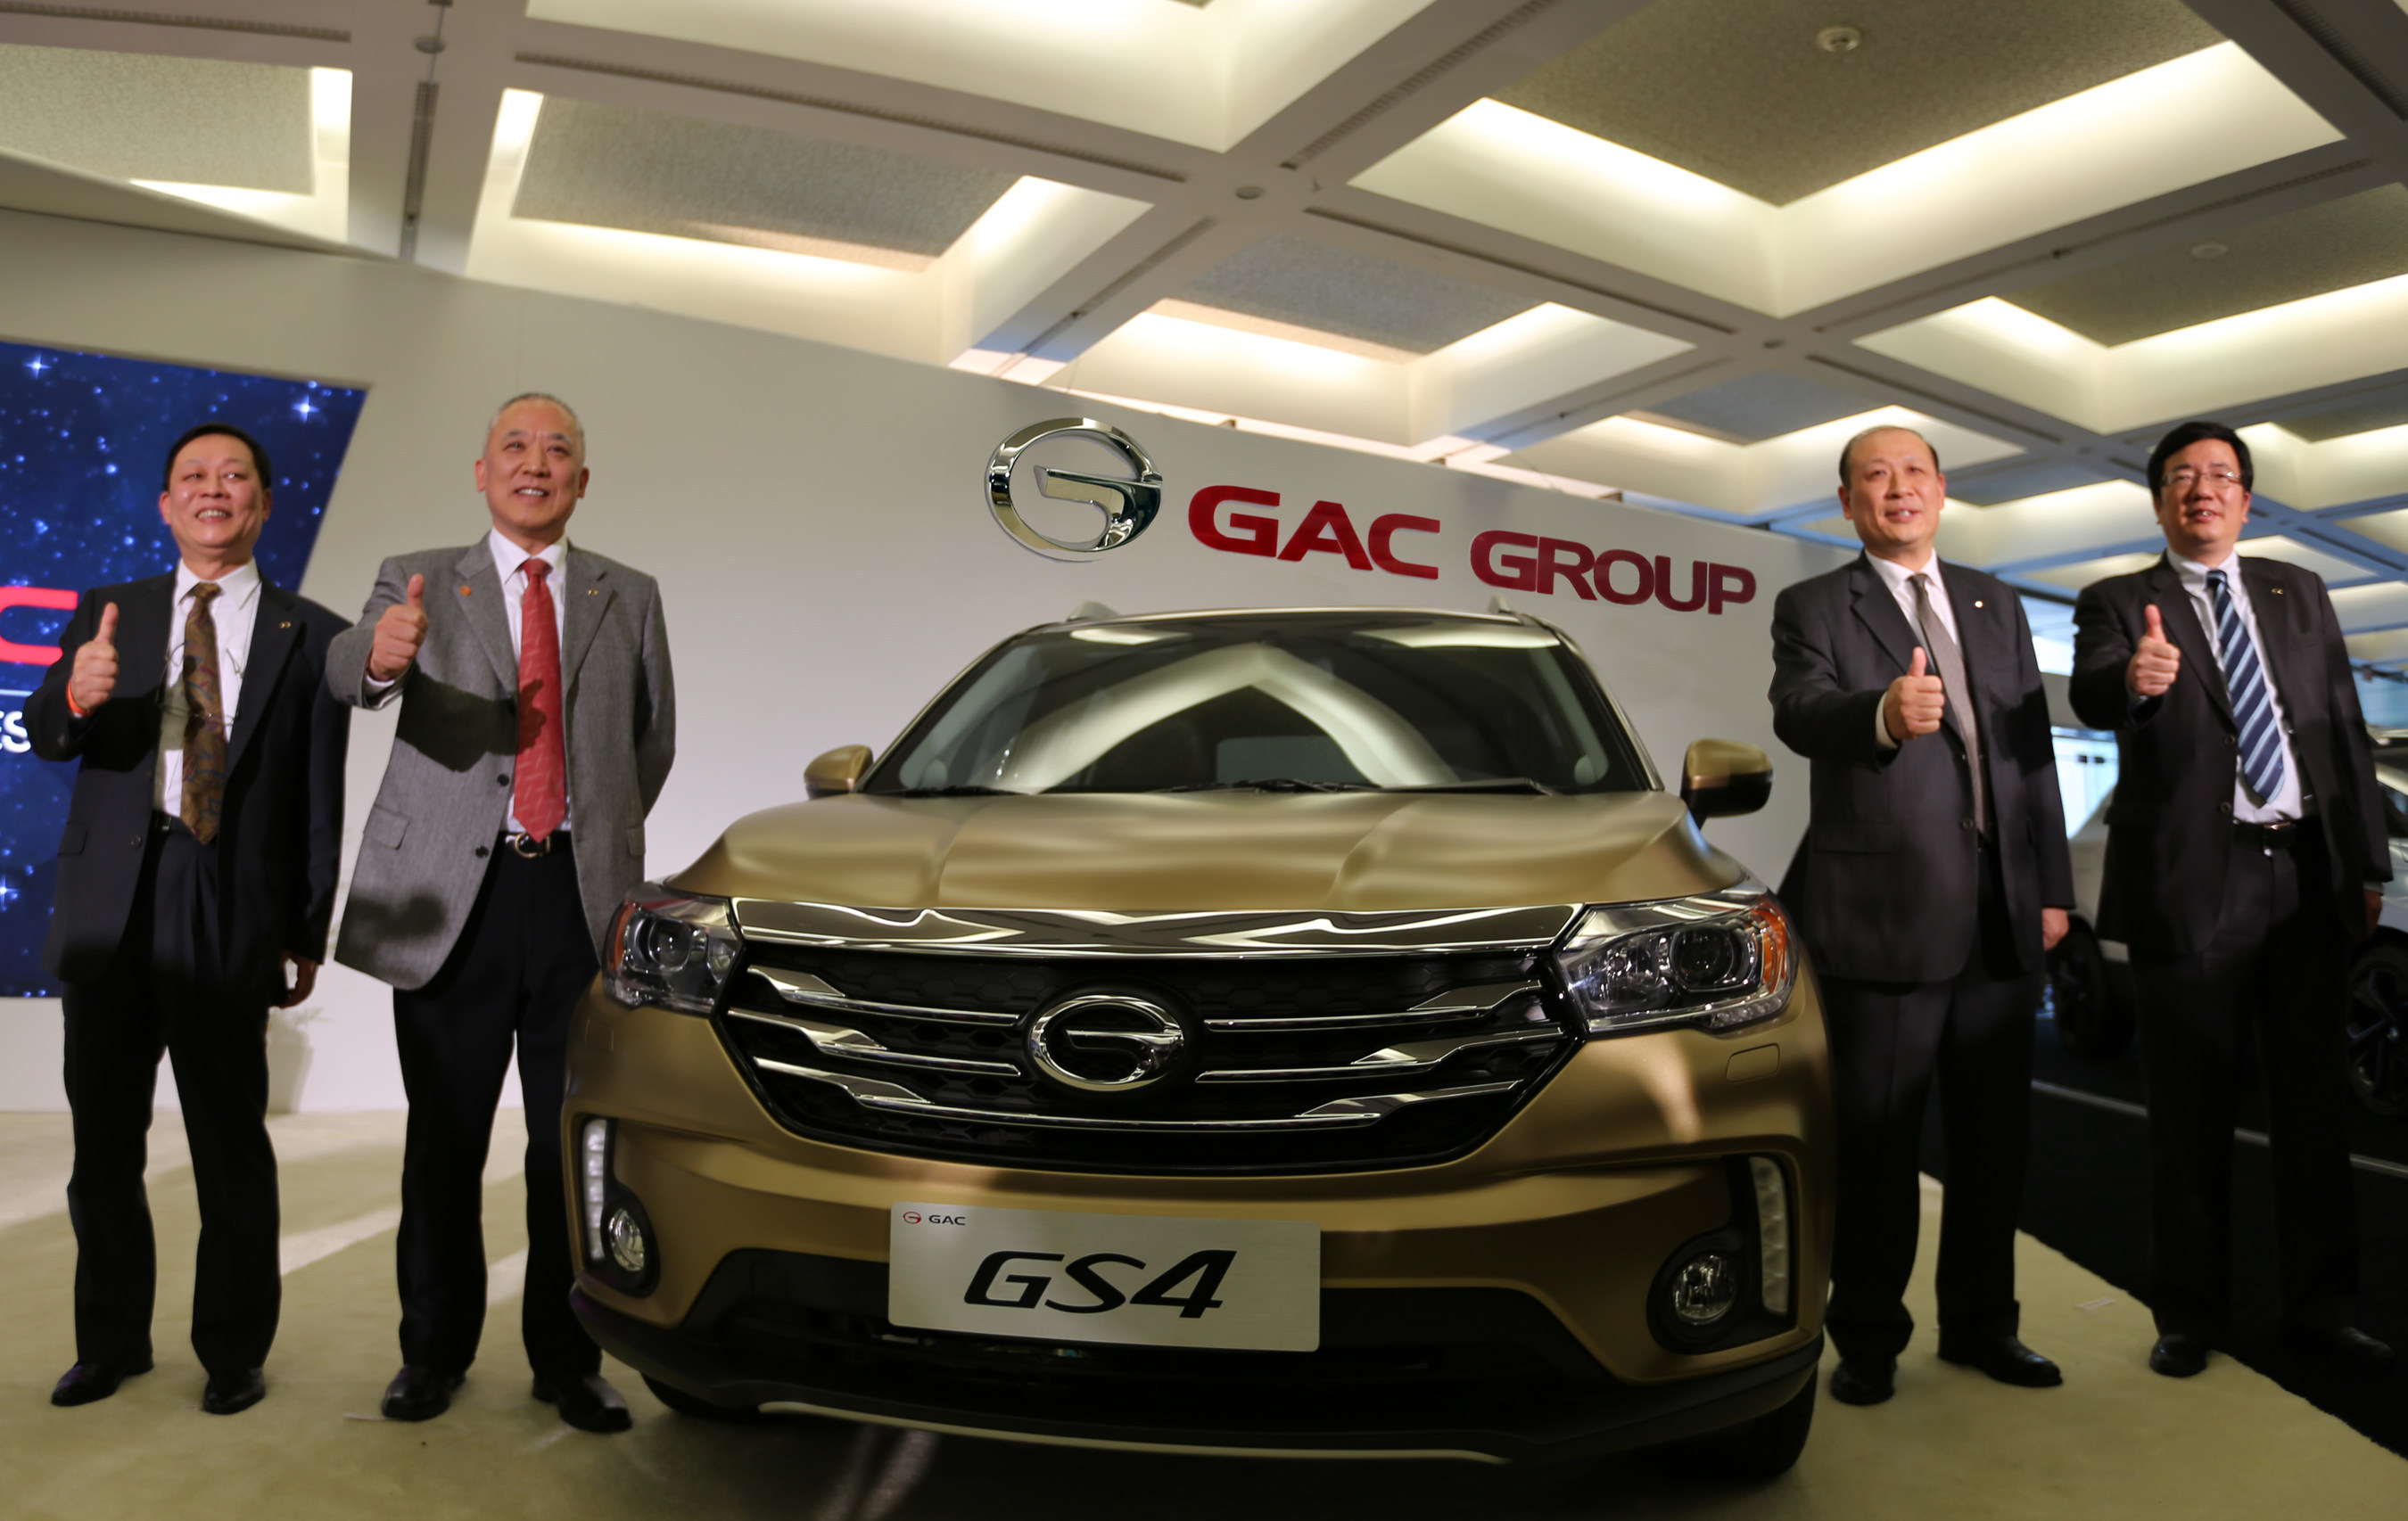 From left to right: Huang Xiangdong, President of GAC Engineering, Yuan Zhongrong, Vice Chairman of GAC Group, Zhang Qingsong, Vice President of GAC Group, and Wu Song, General Manager of GAC Motor